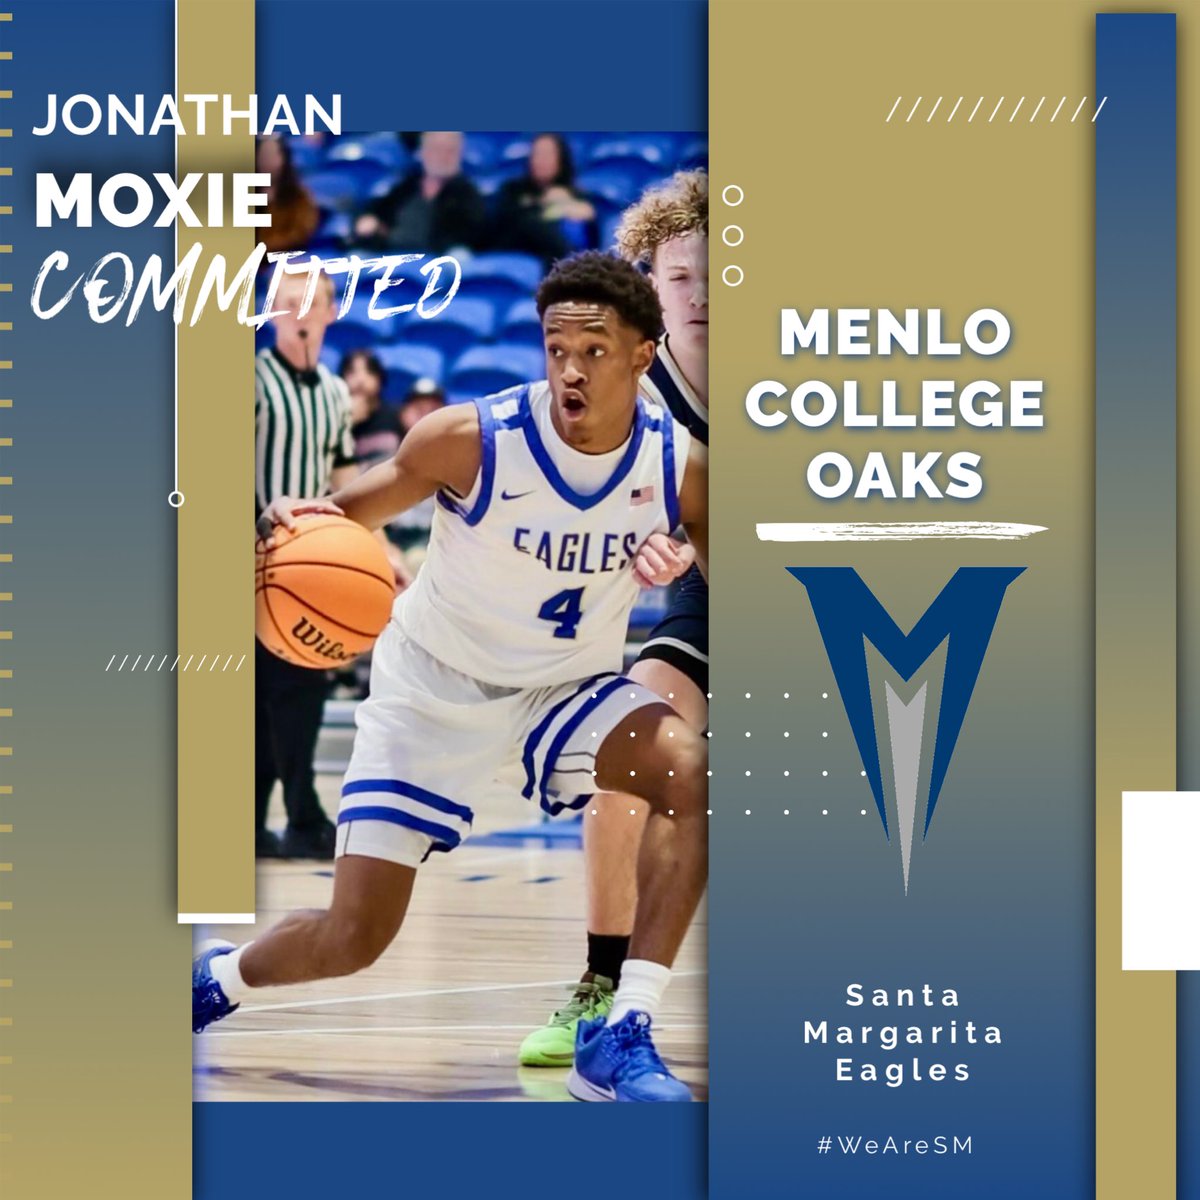 Let’s congratulate Jonathan Moxie on his commitment to Menlo College!! We look forward to cheering on you and your fellow Oaks starting next season!! @MenloMBB #ItsOakTime #WeAreSM🦅 @SMCHSEagles @SMCHSAthletics @FrankieBur